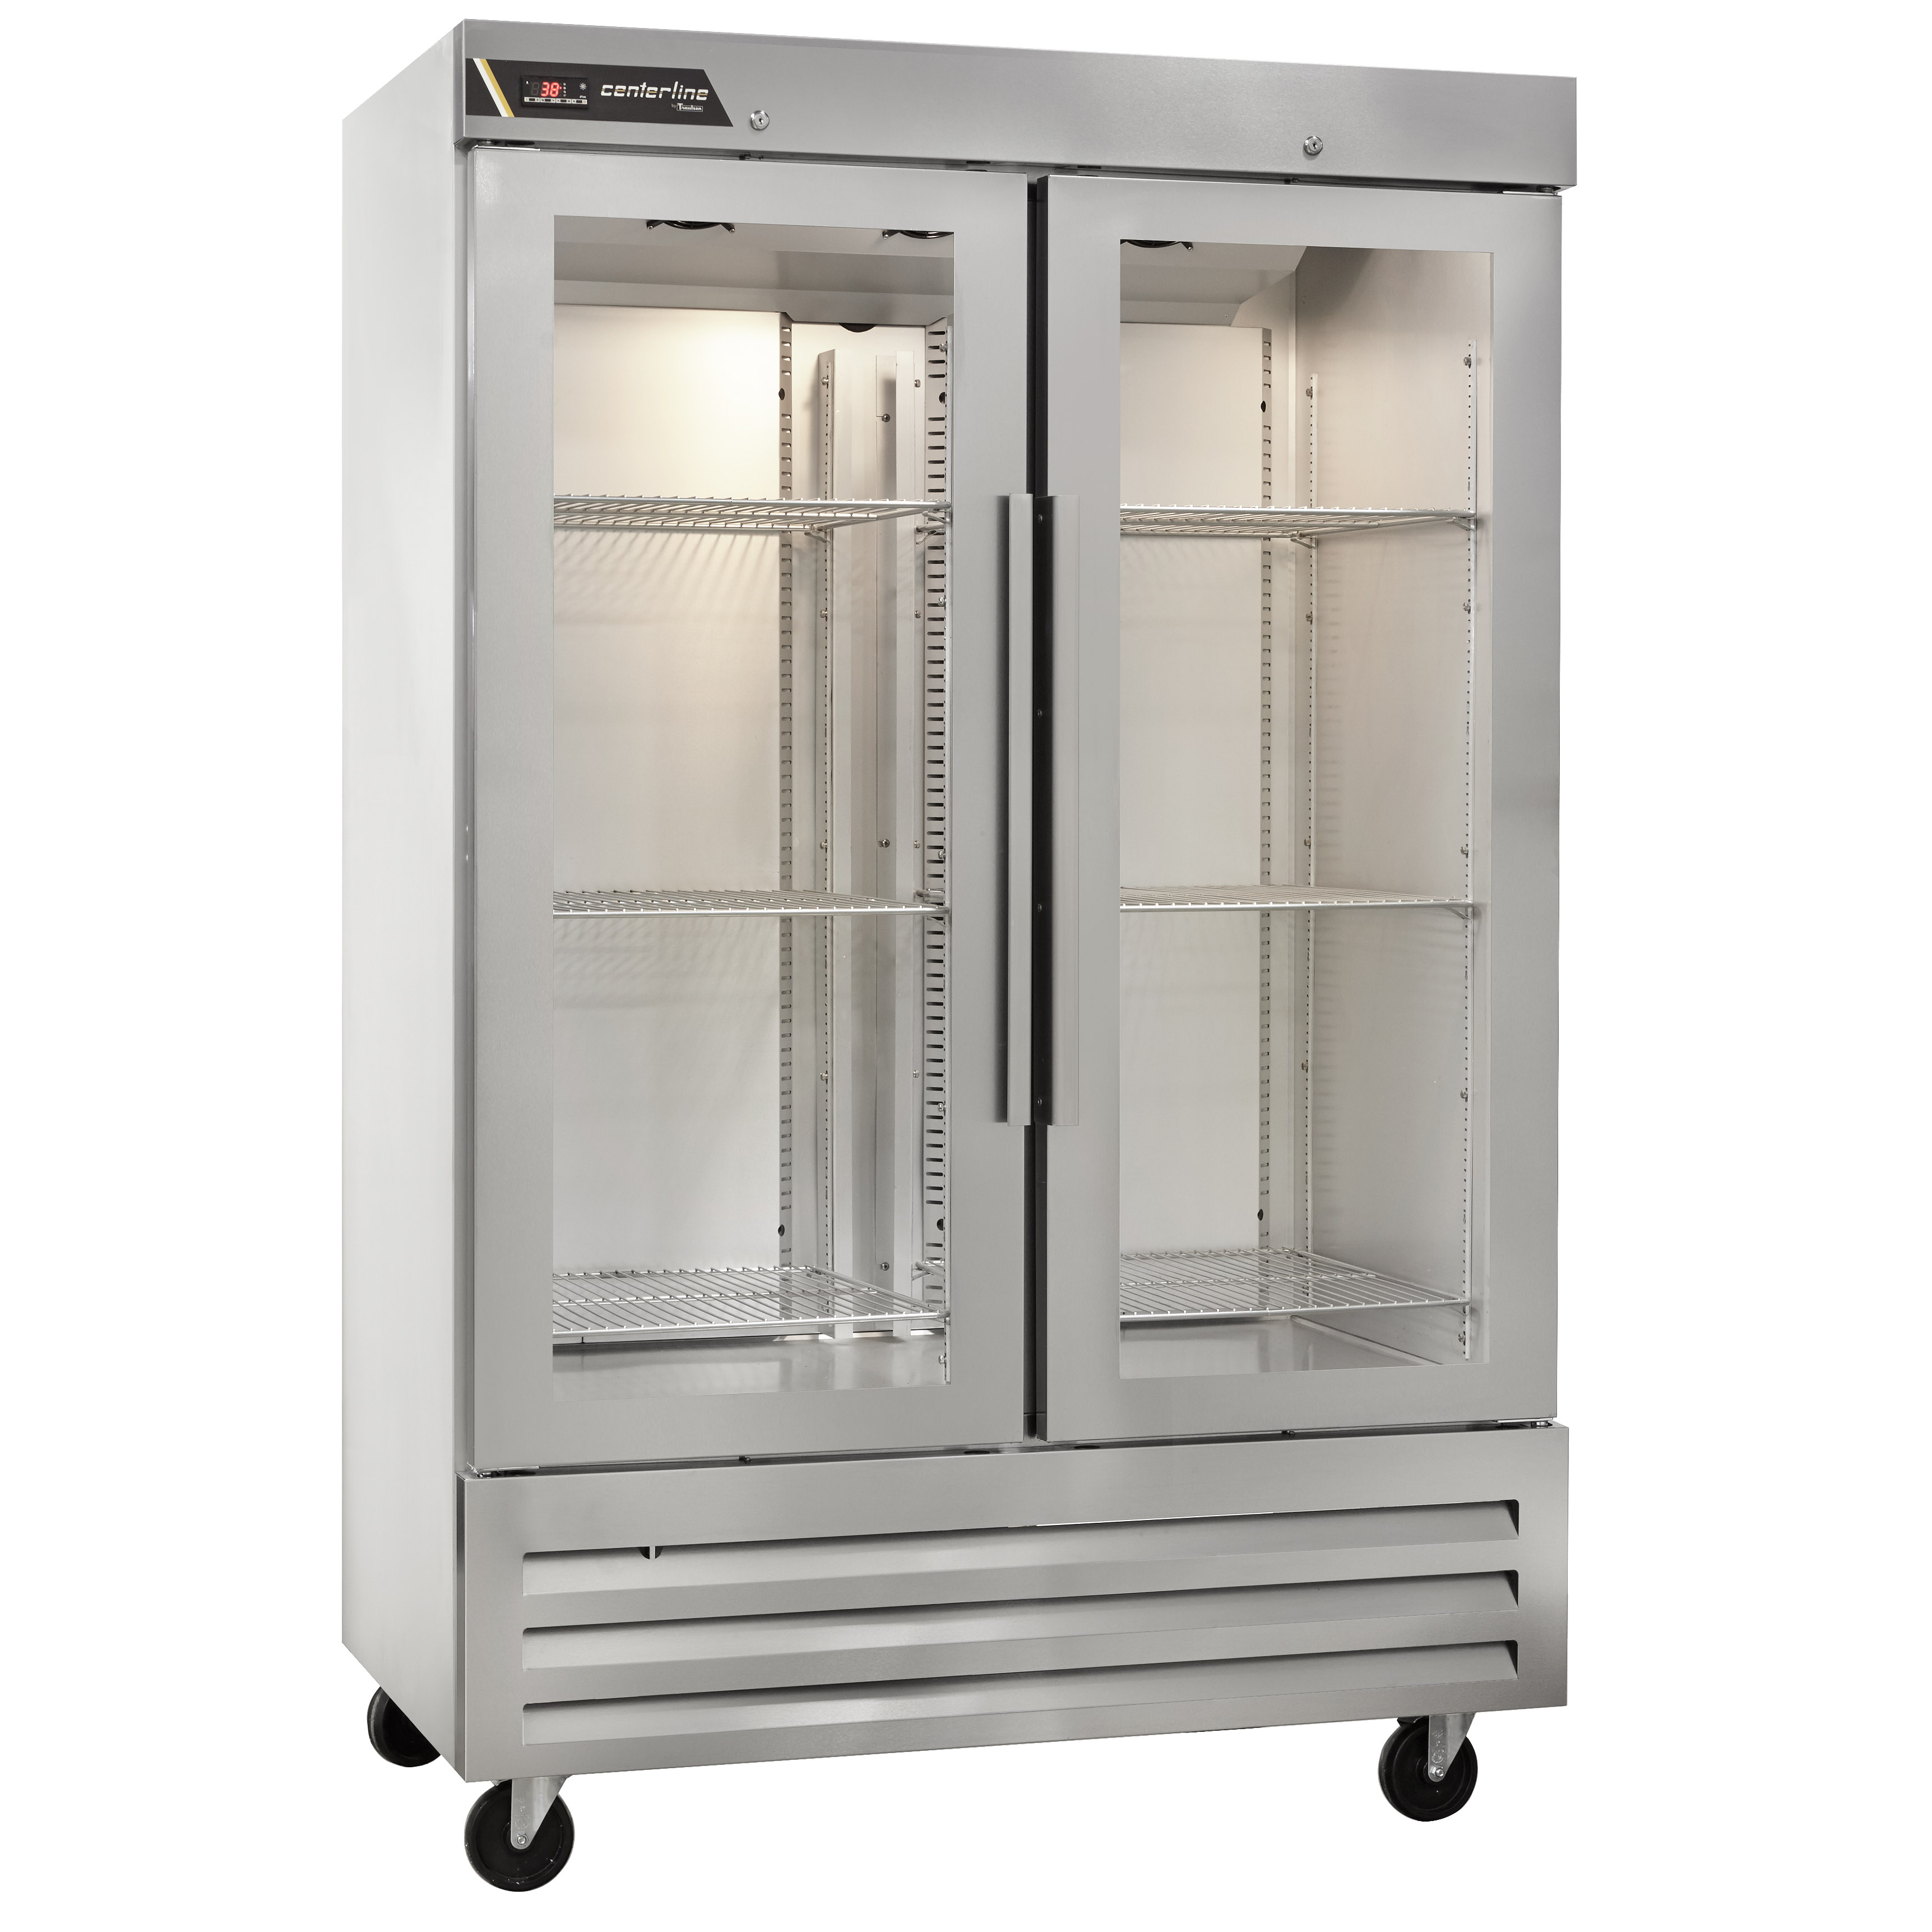 Centerline by Traulsen CLBM-49R-FG 2-Section Hinged Glass Door Reach-In Refrigerator